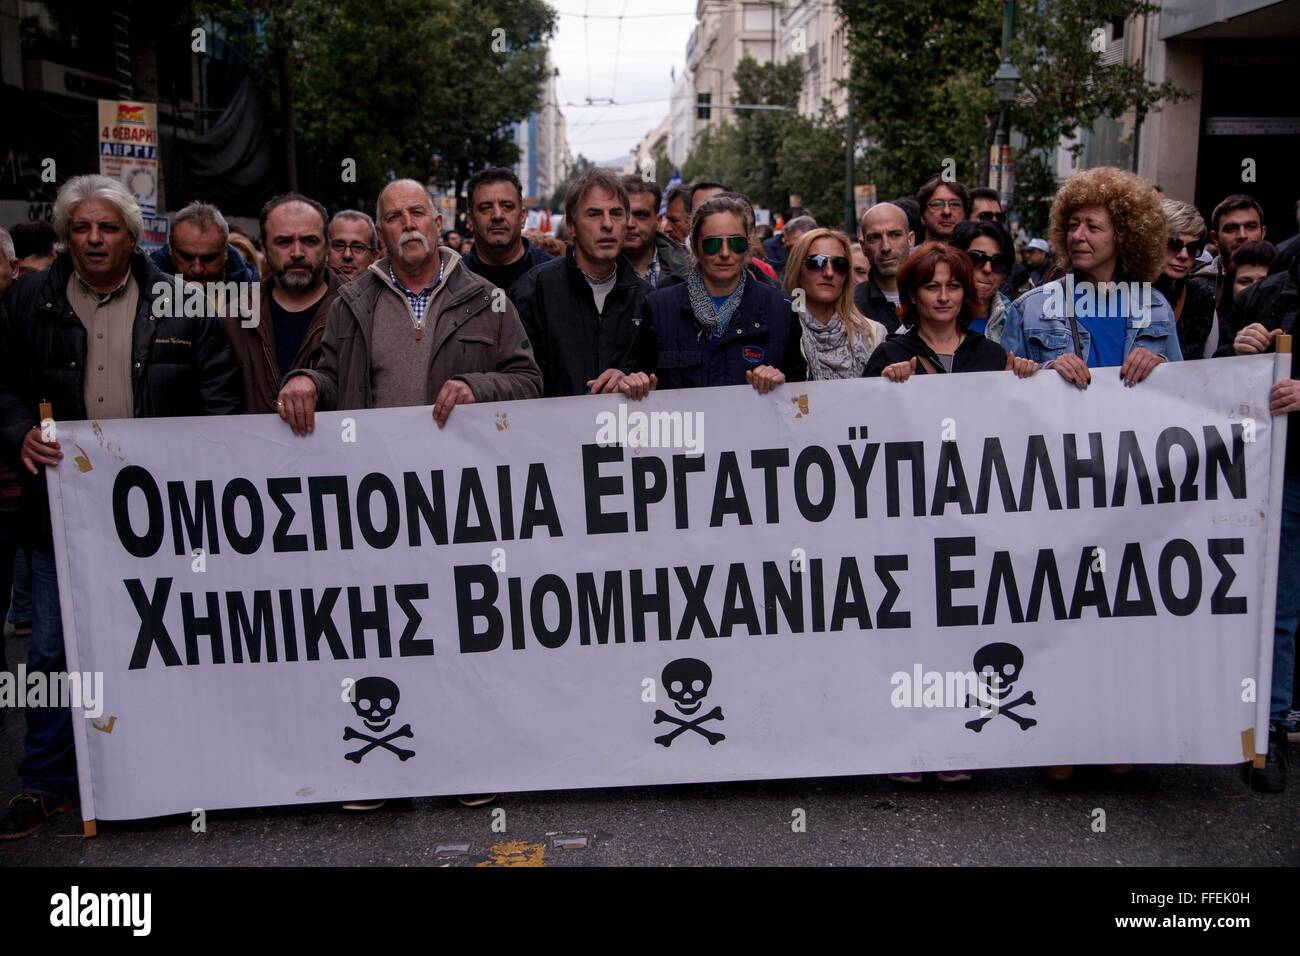 Protest of Greek Chemistry Industry against reform in pension system. Unions call for 24hrs. strike, against planned reform at pension- and sozial insurance system of Greece. 04.02.2016 Stock Photo